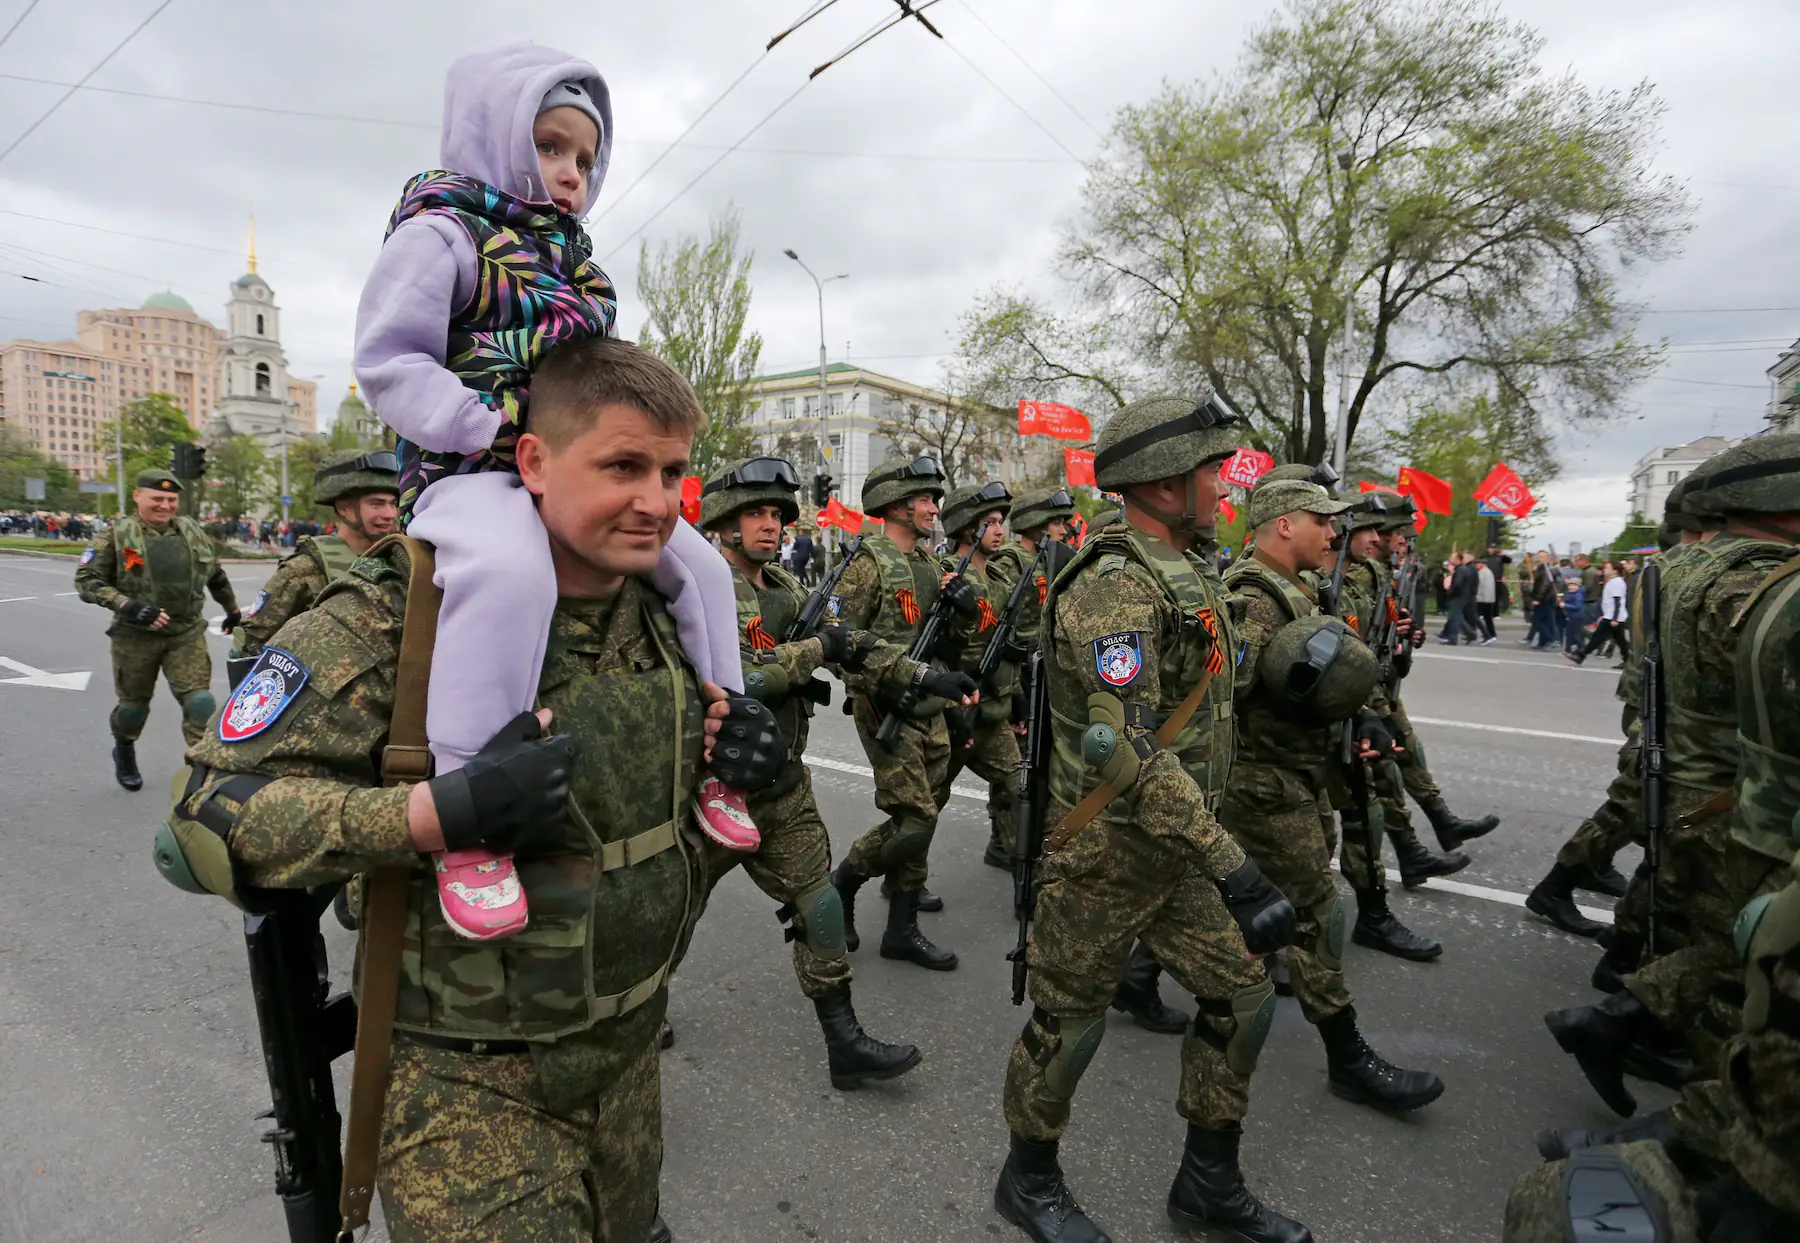 A participant carries a child on his shoulders (Photo: Washington Post) 